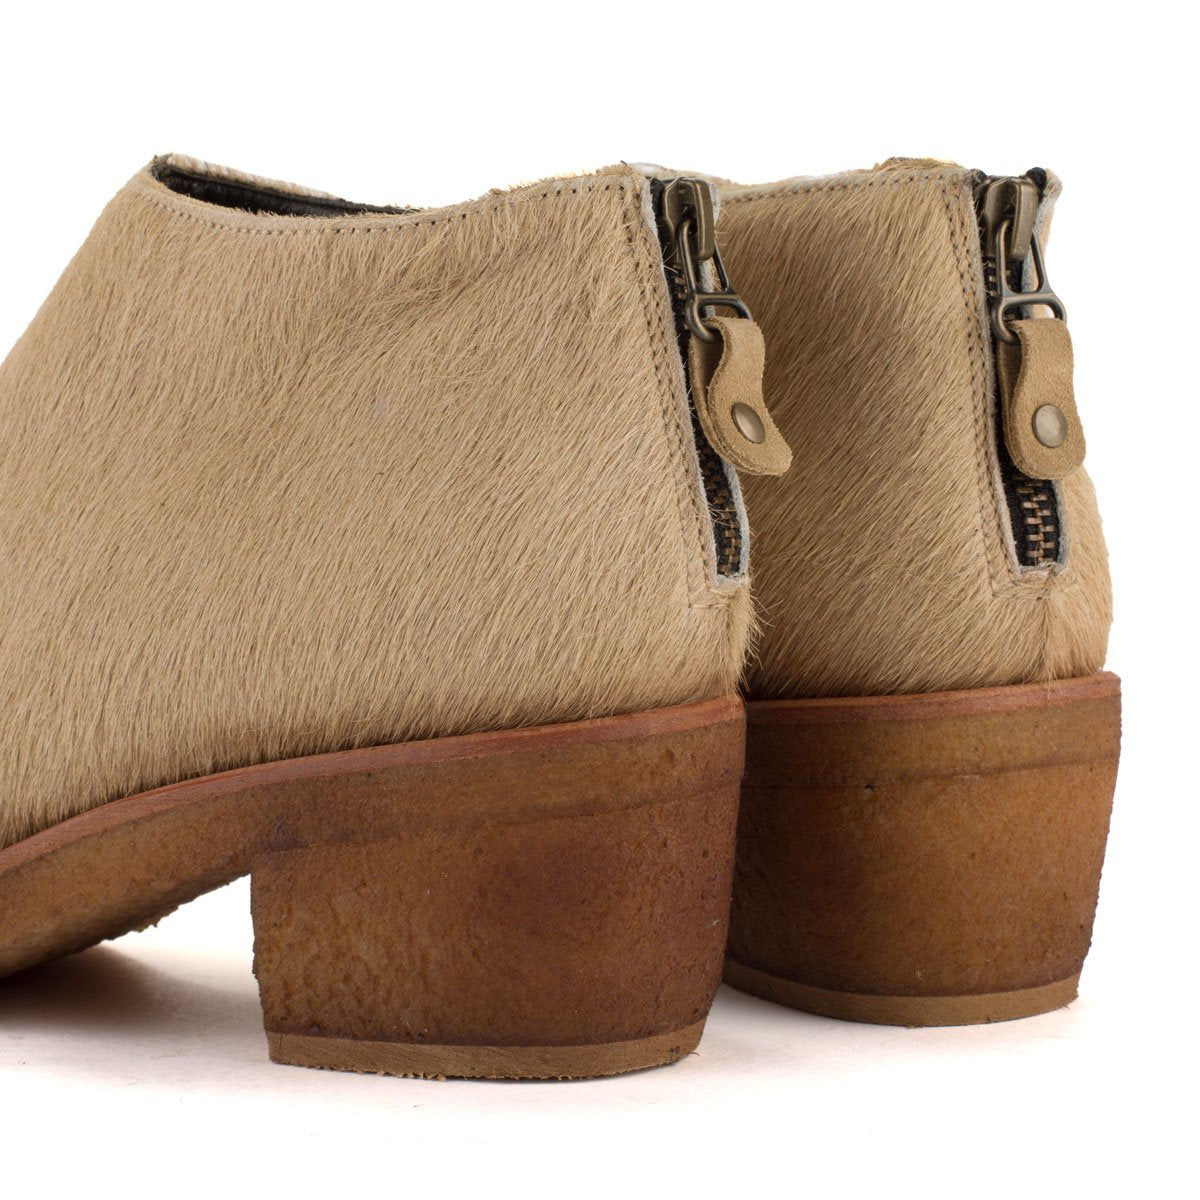 TEXAS 24 ANKLE BOOTS – Pony sand